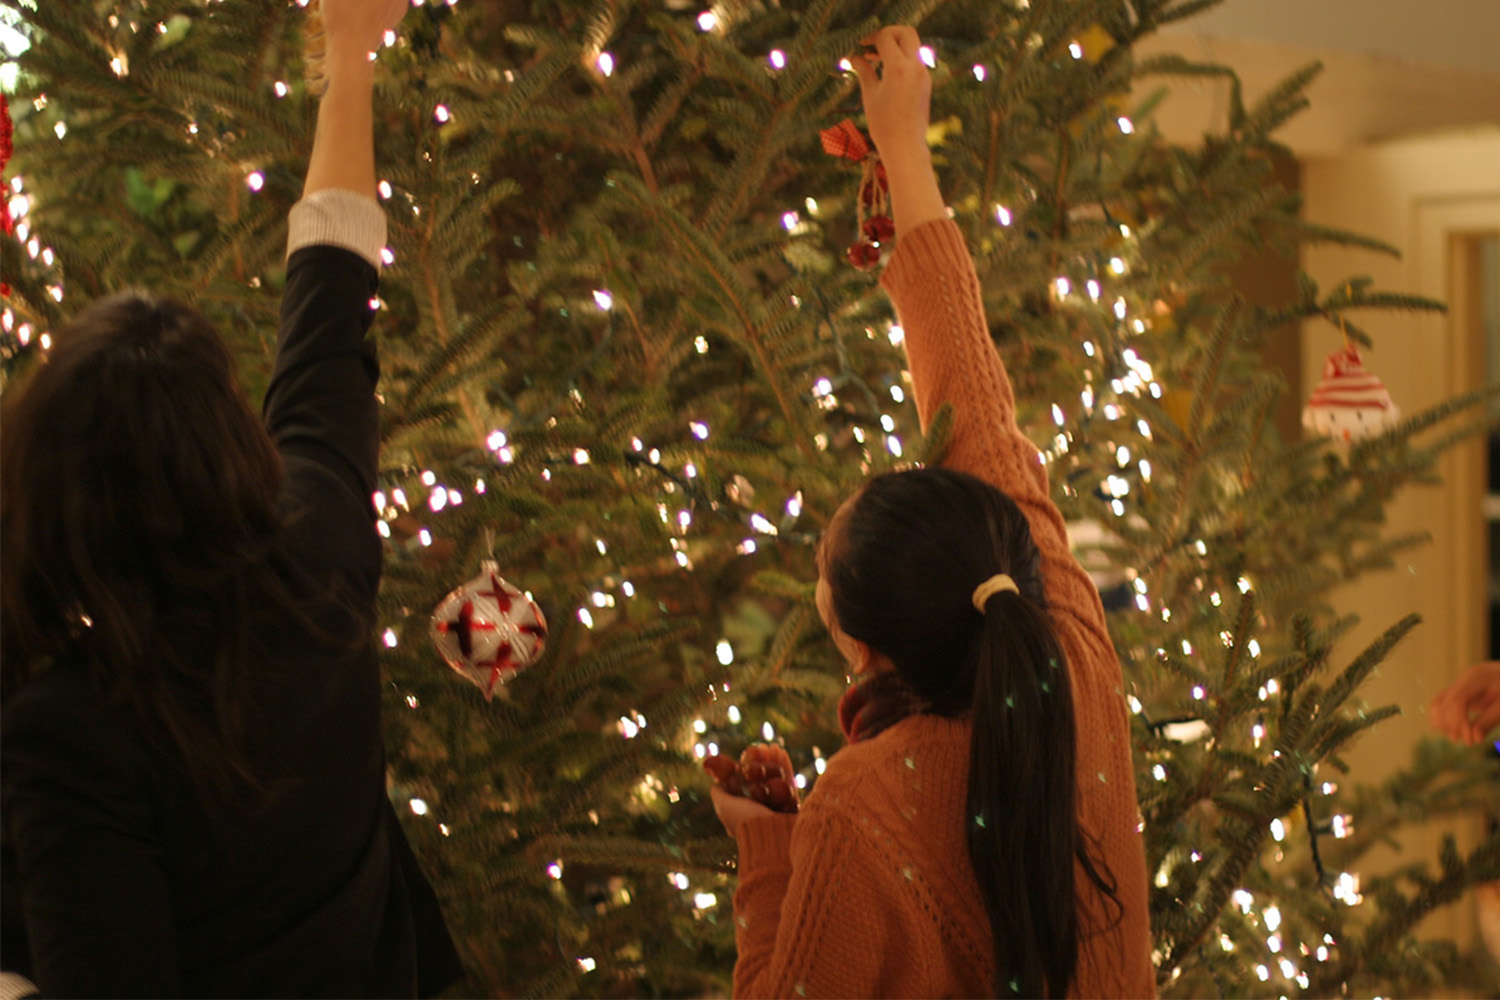 2 people reach to place ornaments on high spot of Christmas tree 